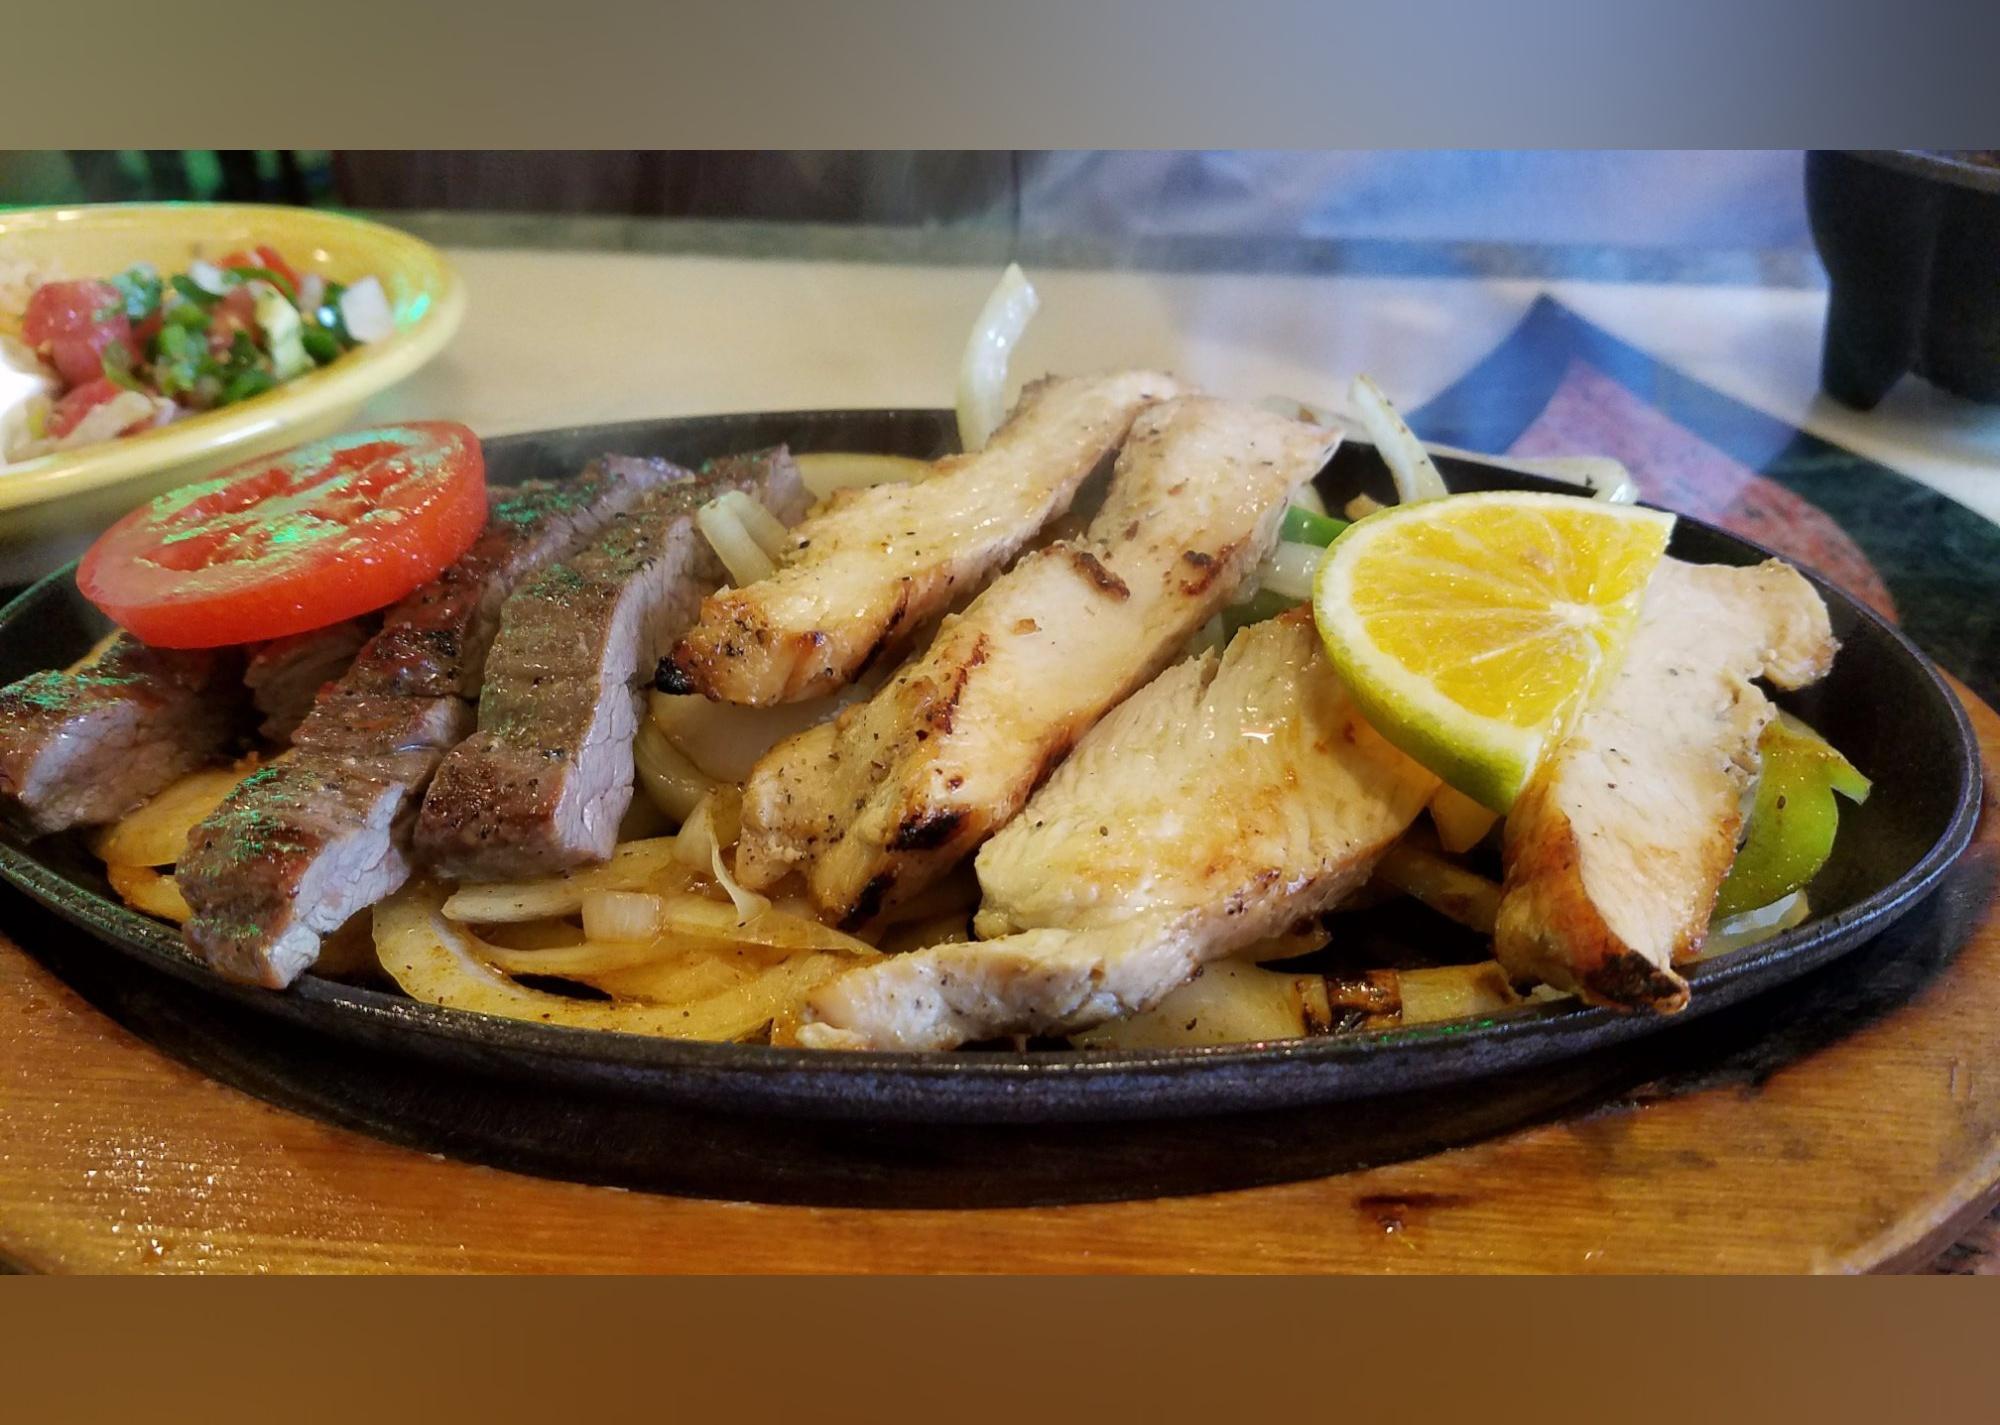 <p>- Rating: 4.0 / 5 (13 reviews)<br>- Detailed ratings: Food (3.5/5), Service (4.0/5), Value (3.5/5)<br>- Type of cuisine: Mexican<br>- Price: $$ - $$$<br>- Address: 145 I-10 Frontage Road, Beaumont, TX 77707-2503<br>- <a href="https://www.tripadvisor.com//Restaurant_Review-g60737-d10060448-Reviews-Casa_Tapatia_Mexican_Restaurant_Bar-Beaumont_Texas.html">Read more on Tripadvisor</a></p>